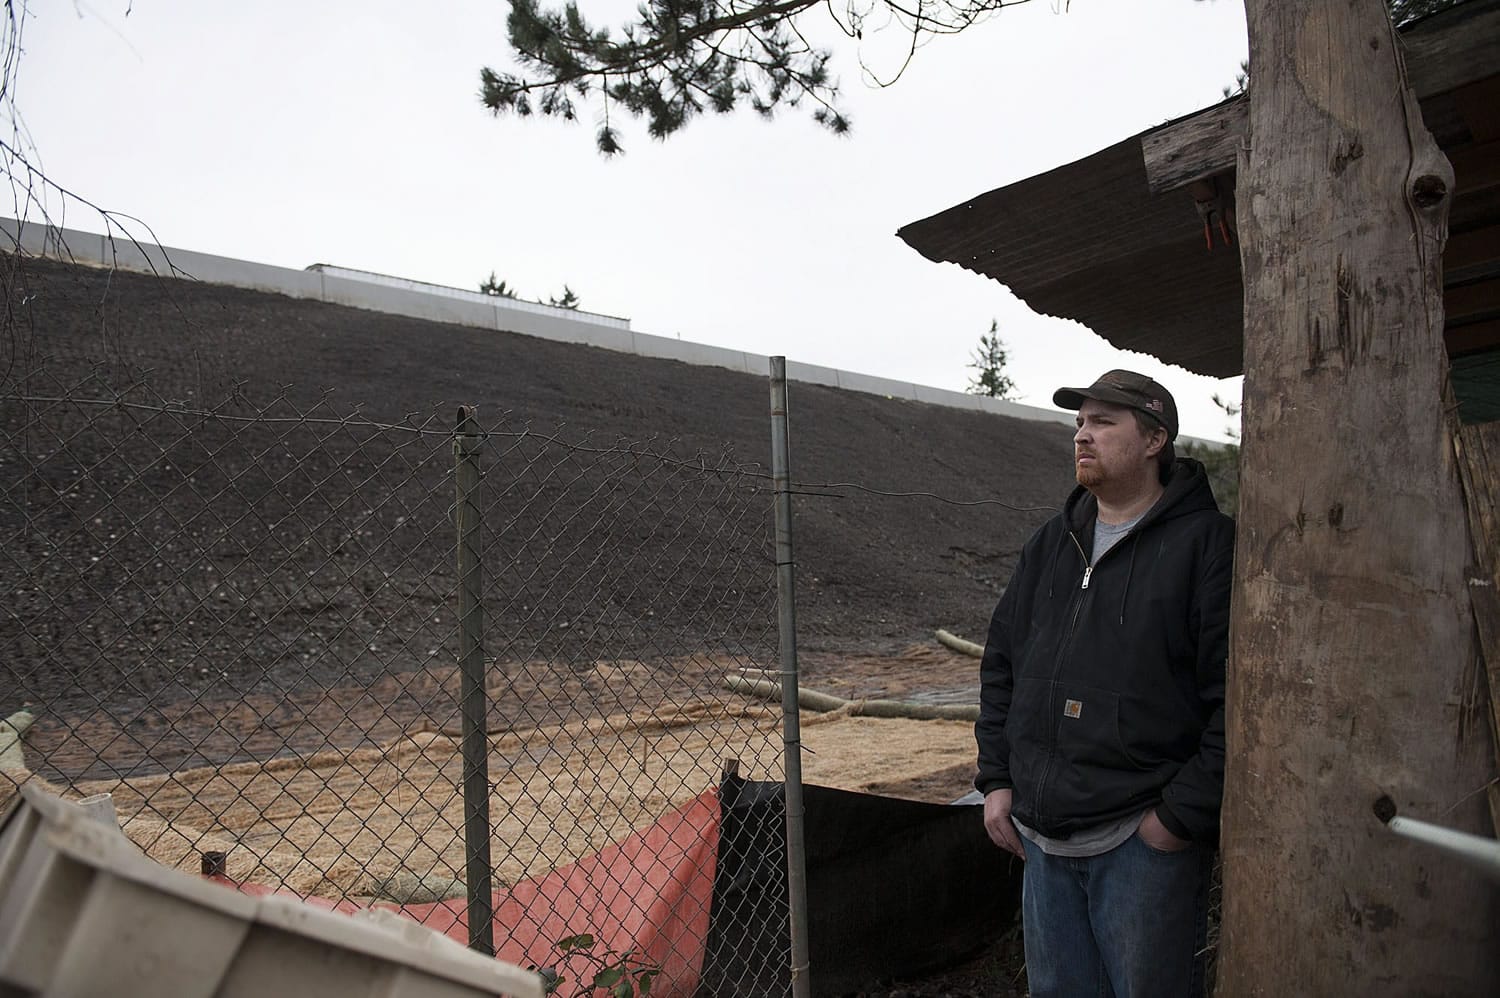 Steven Hoard of Vancouver looks up at the hillside between his backyard and the southbound lanes of Interstate 205. The hillside used to be full of trees, bushes and other brush that muffled the freeway sounds and stabilized the slope, but the state cleared the area to make way for interchange improvements.